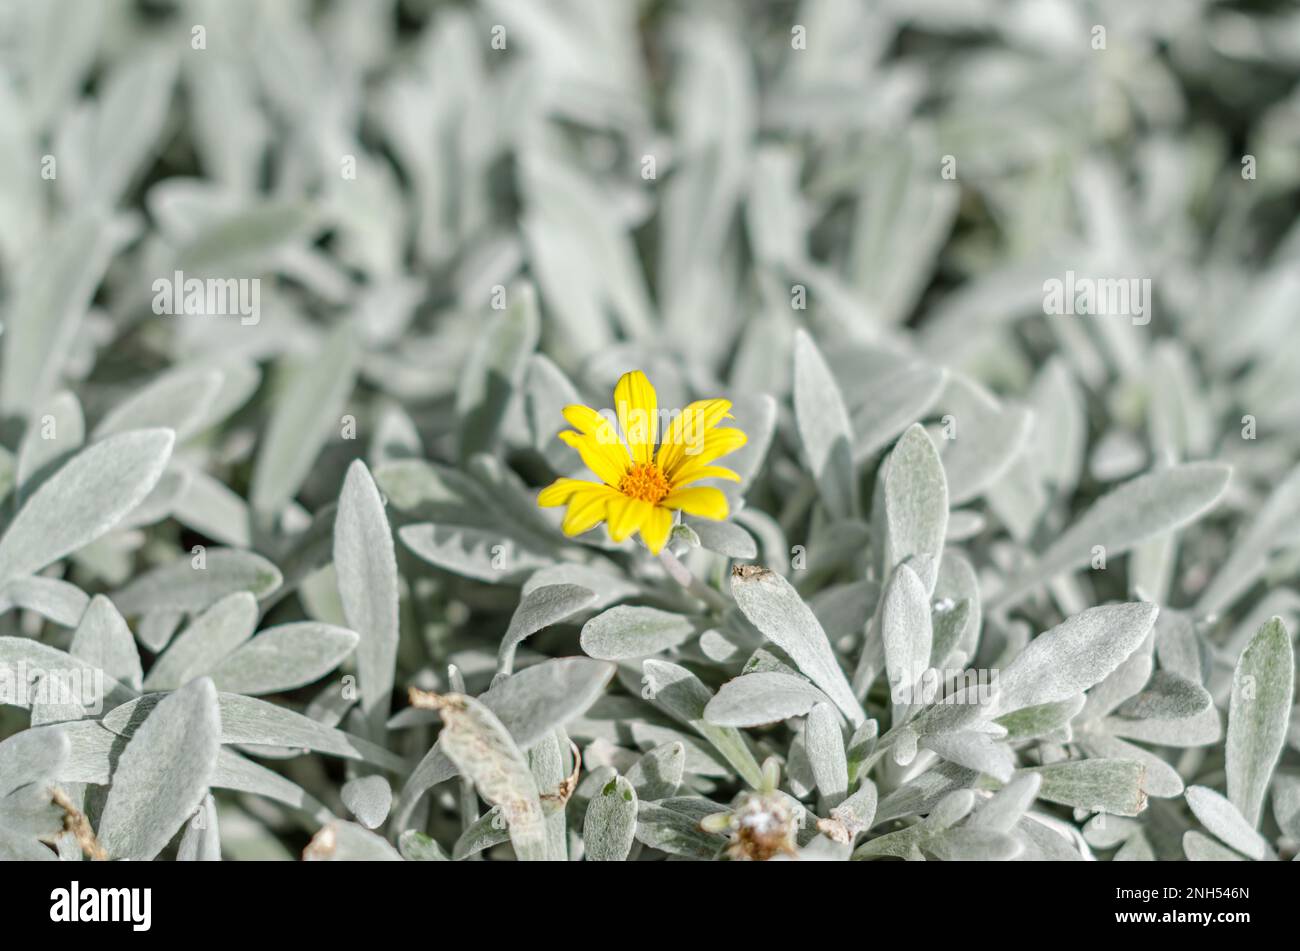 Background of silver leaves with yellow flowers plant Stock Photo